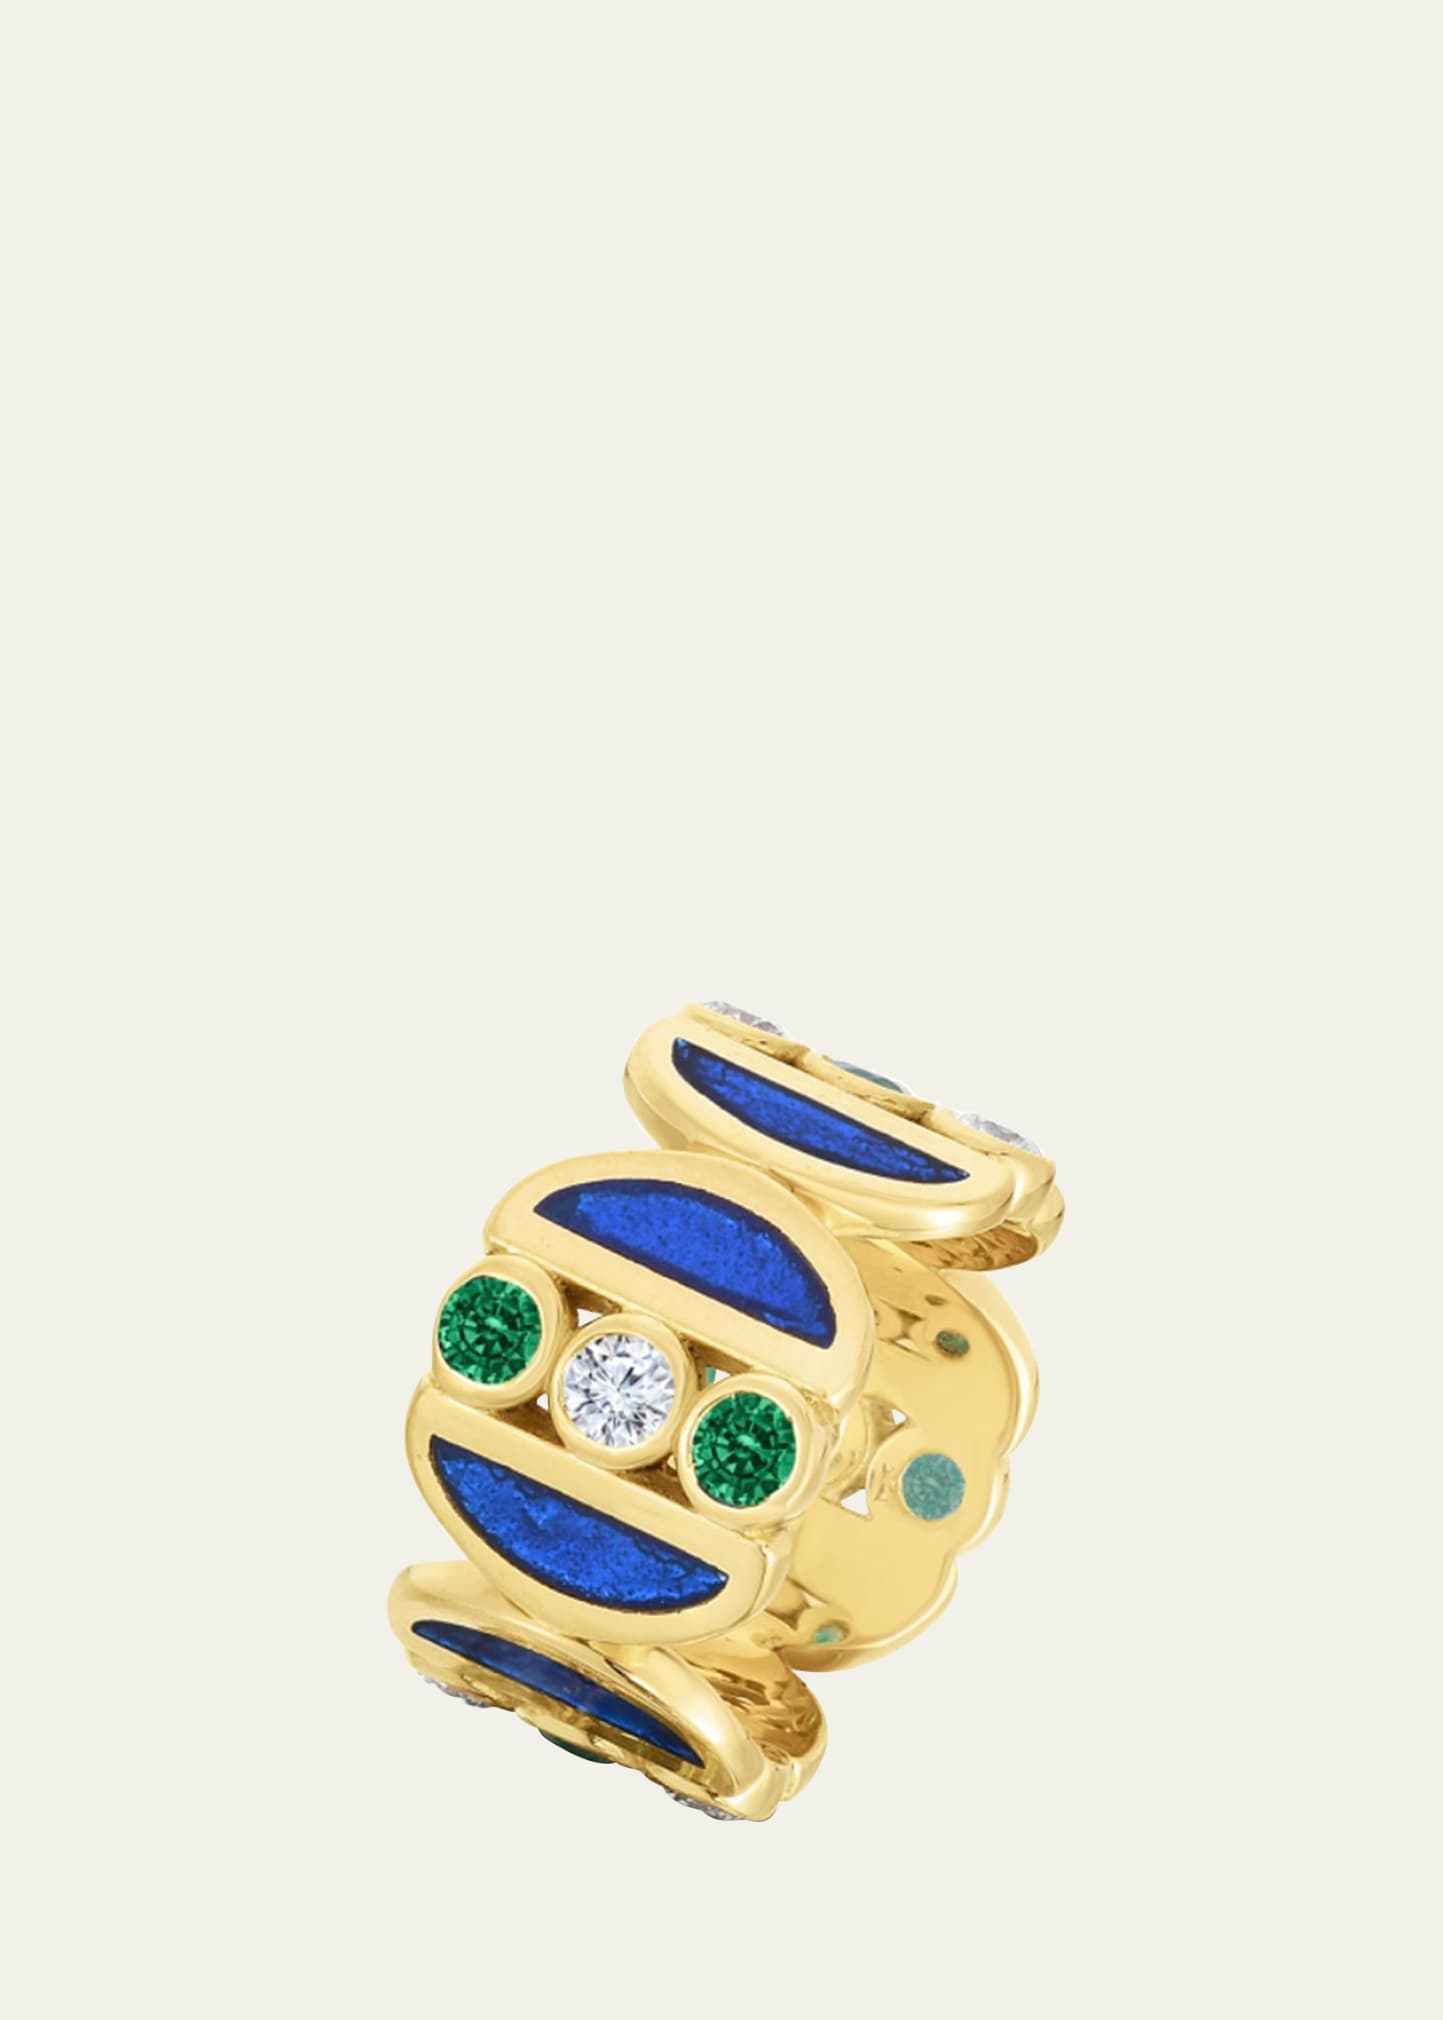 Audrey C. Jewels 18k Yellow Gold Puzzle Ring With Emeralds And Diamonds In Blue/green